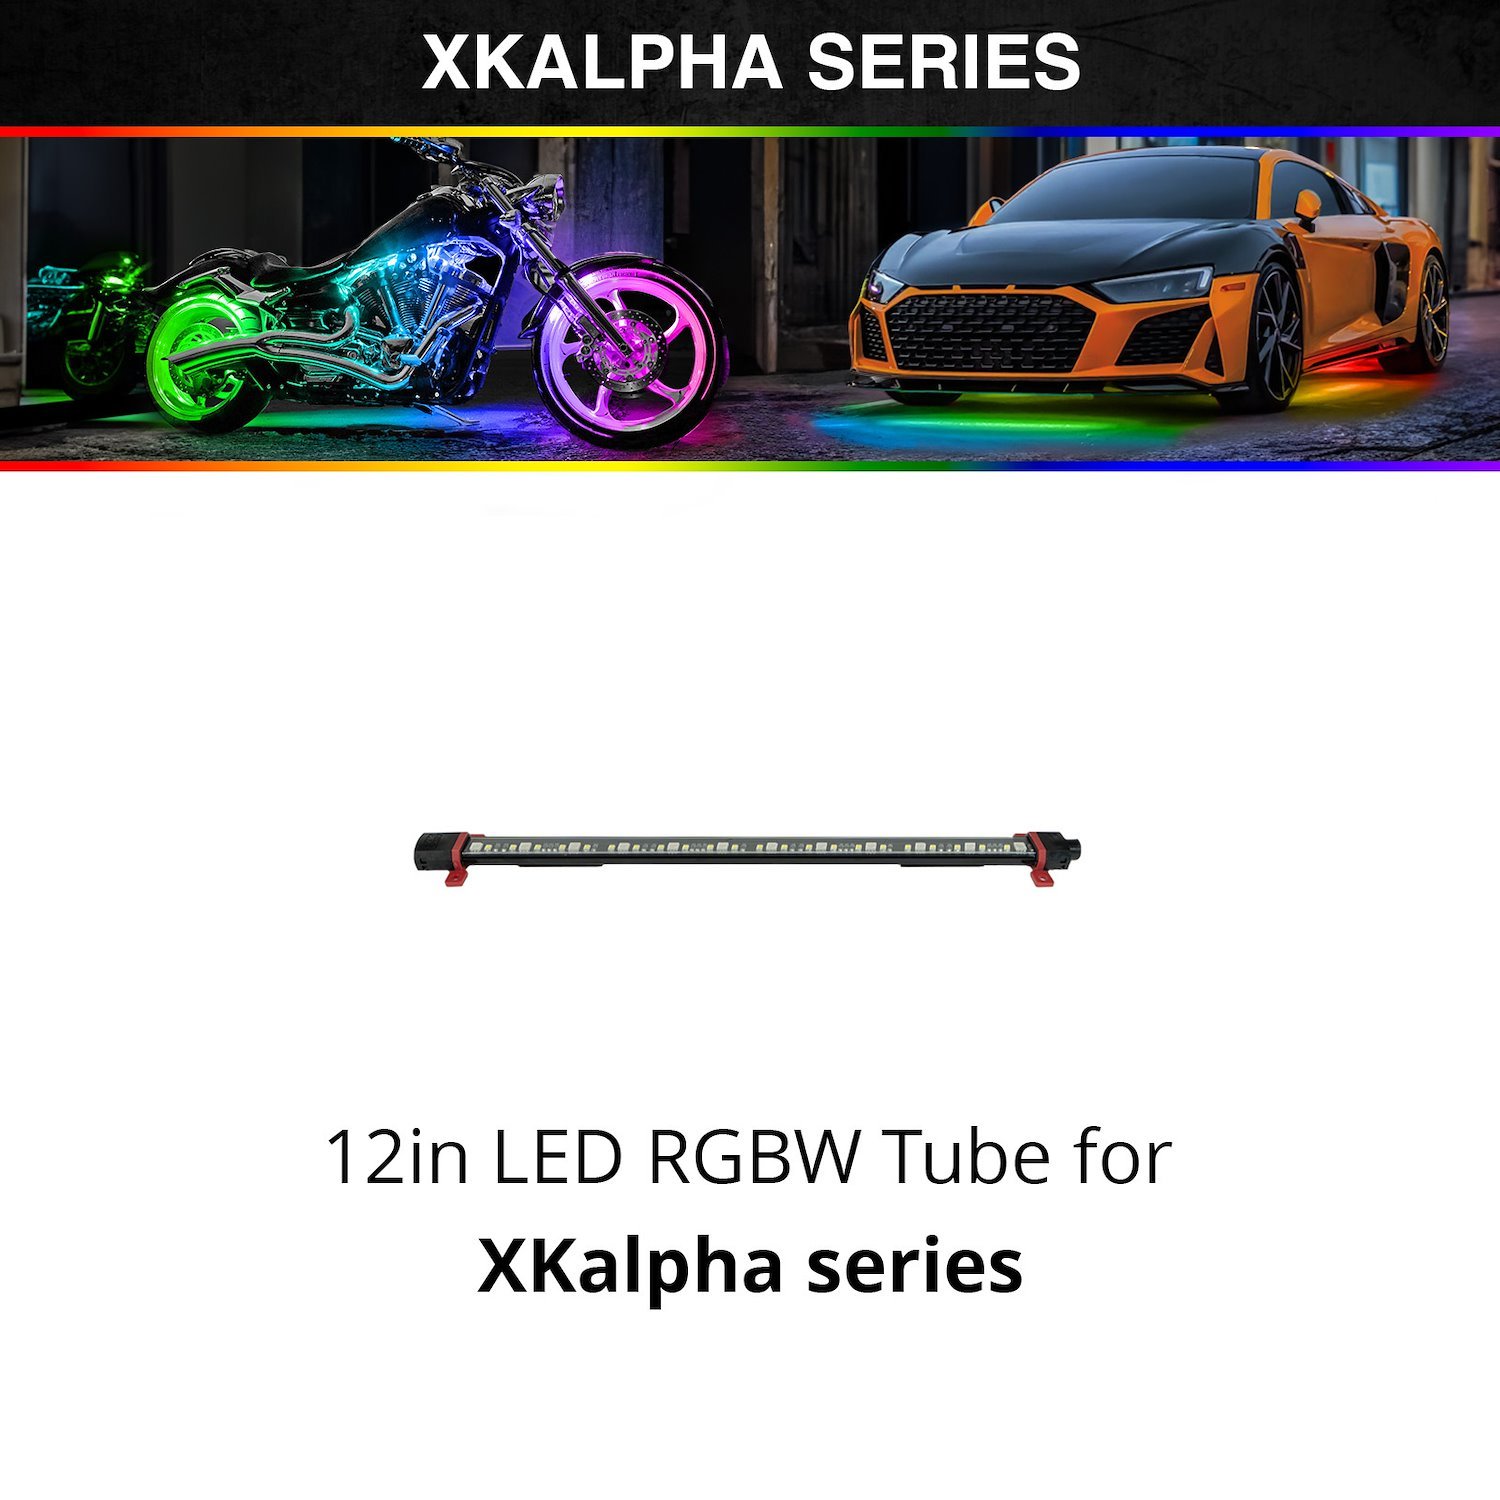 AP-T-12 LED RGBW Tube, XKalpha, 12 in., Universal Fit